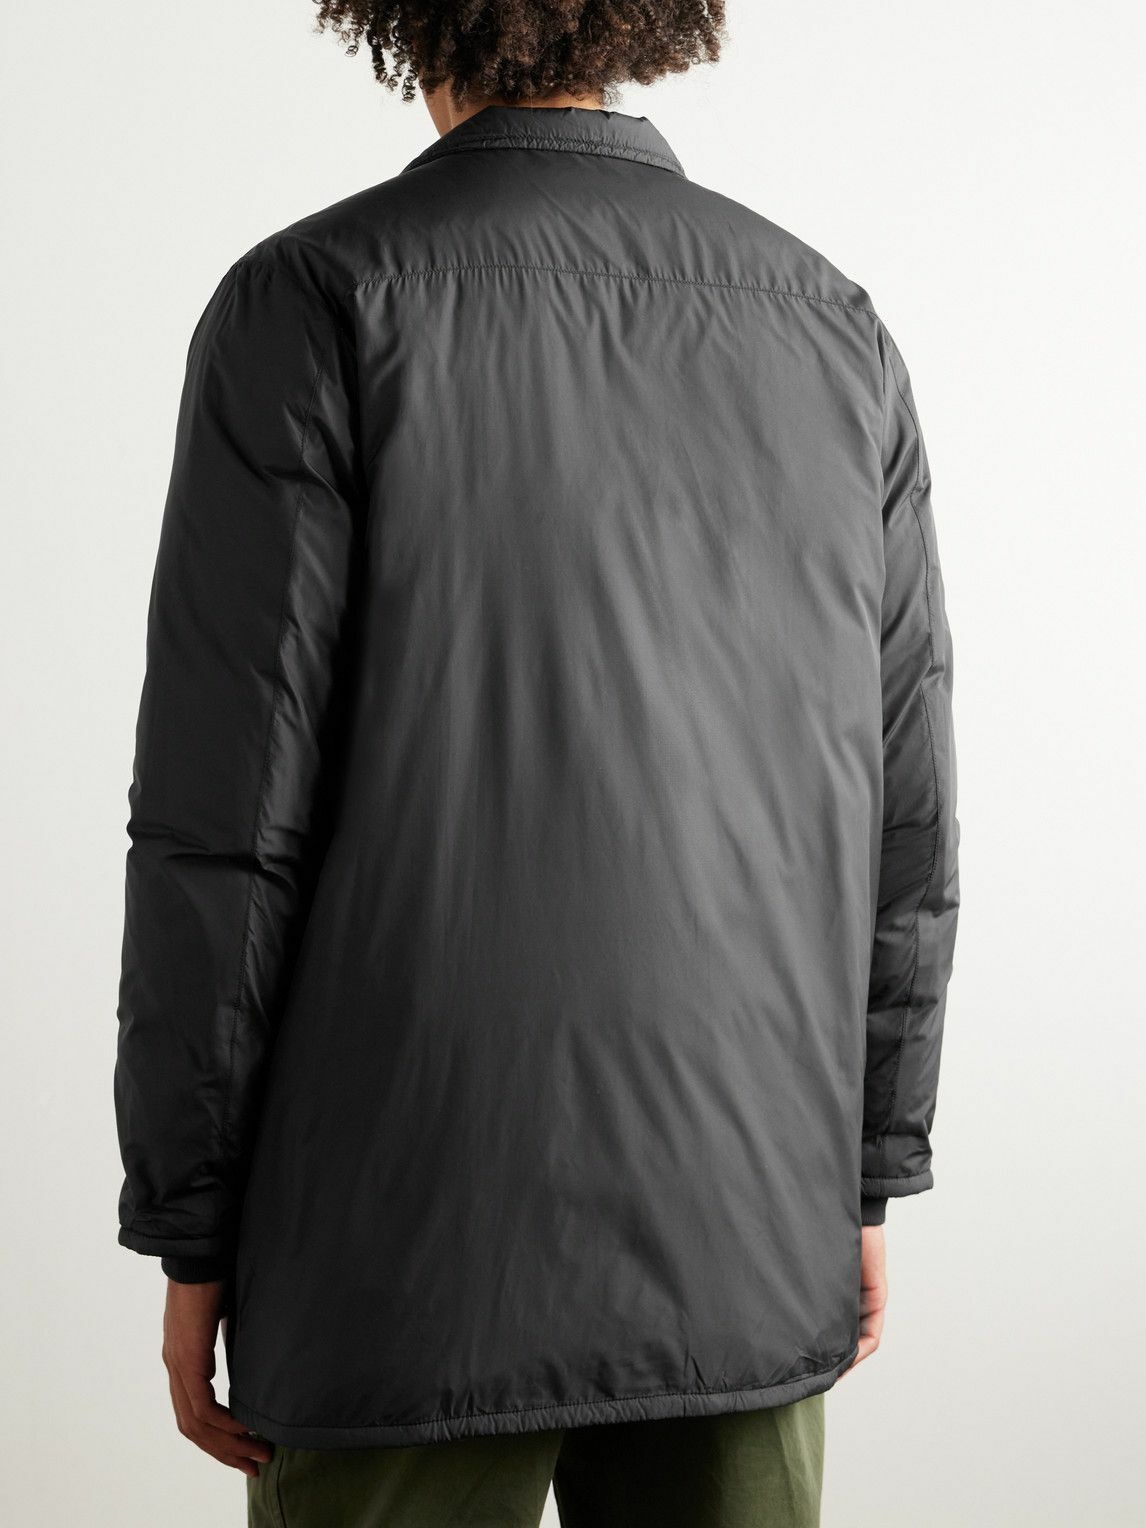 James Perse - Padded Shell Down Parka - Black James Perse